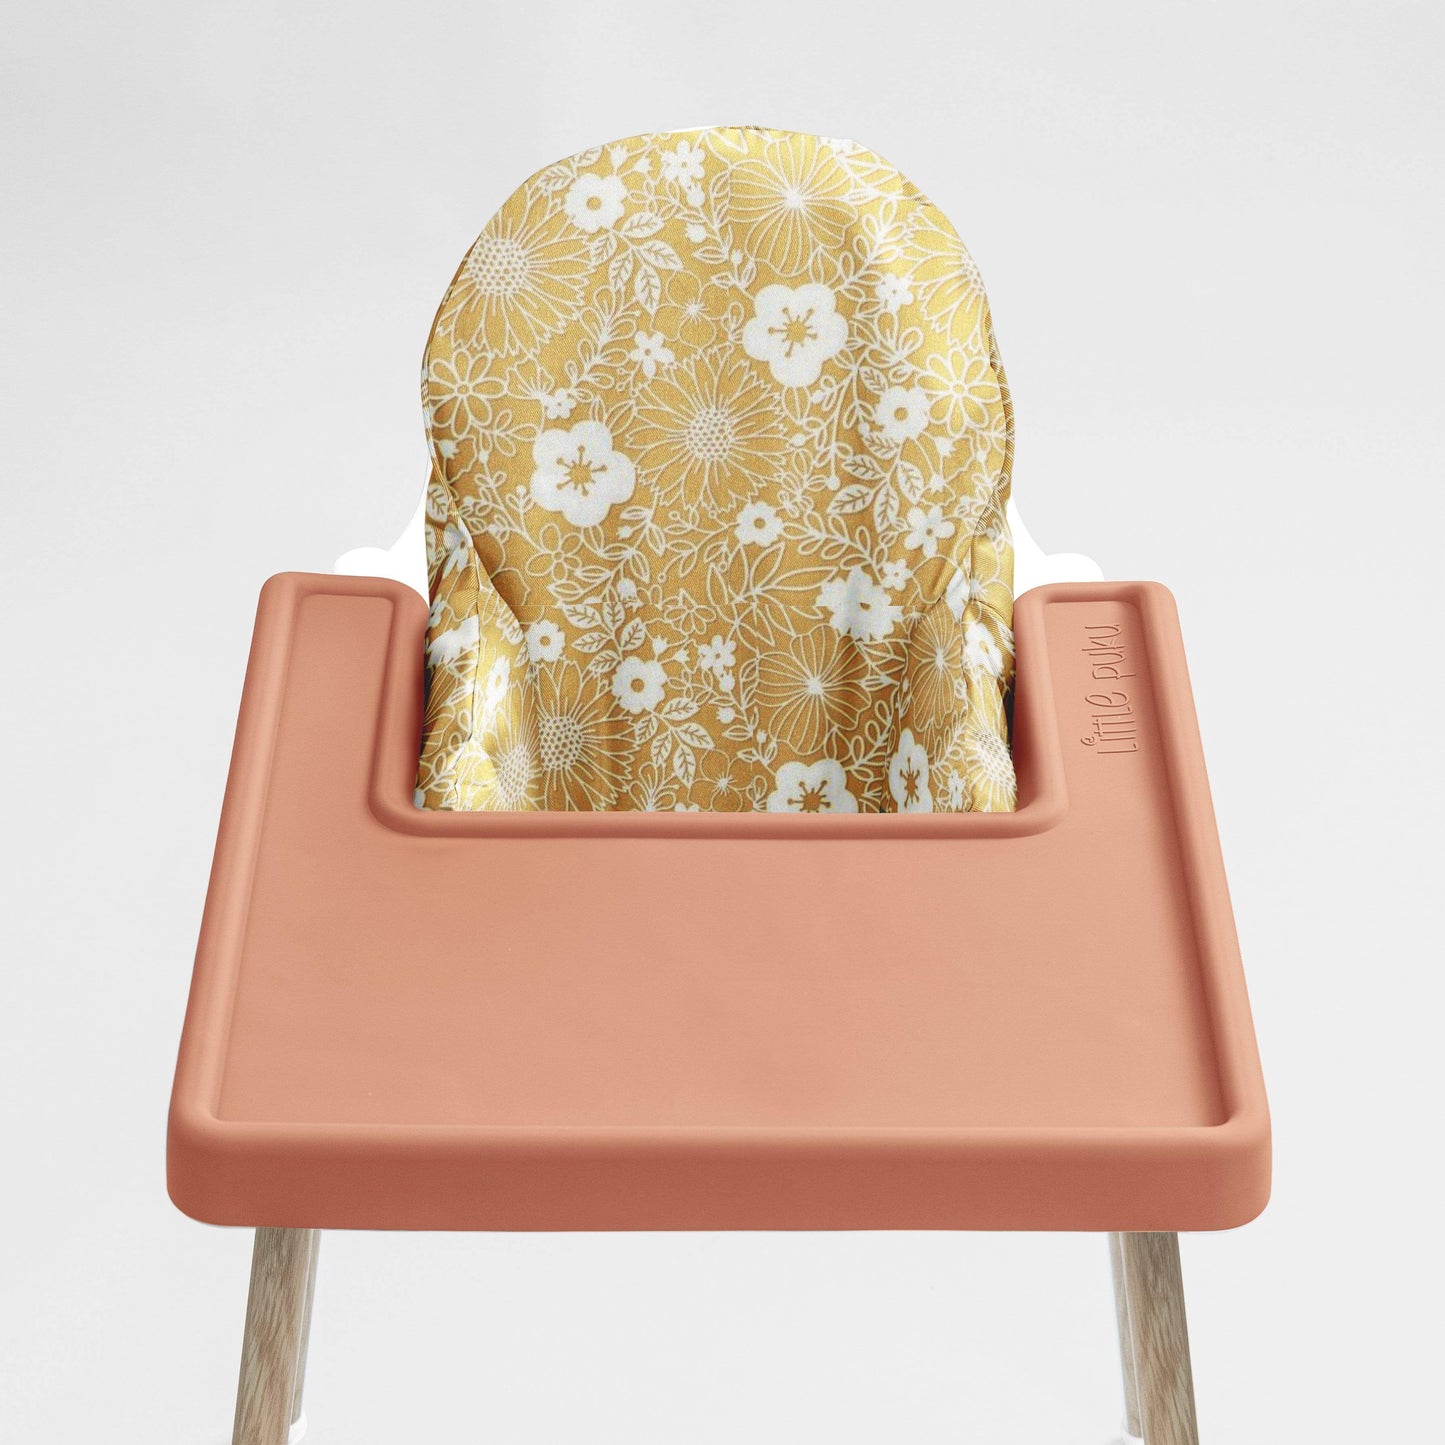 IKEA Highchair Cushion Cover in Papercut Floral in Mustard